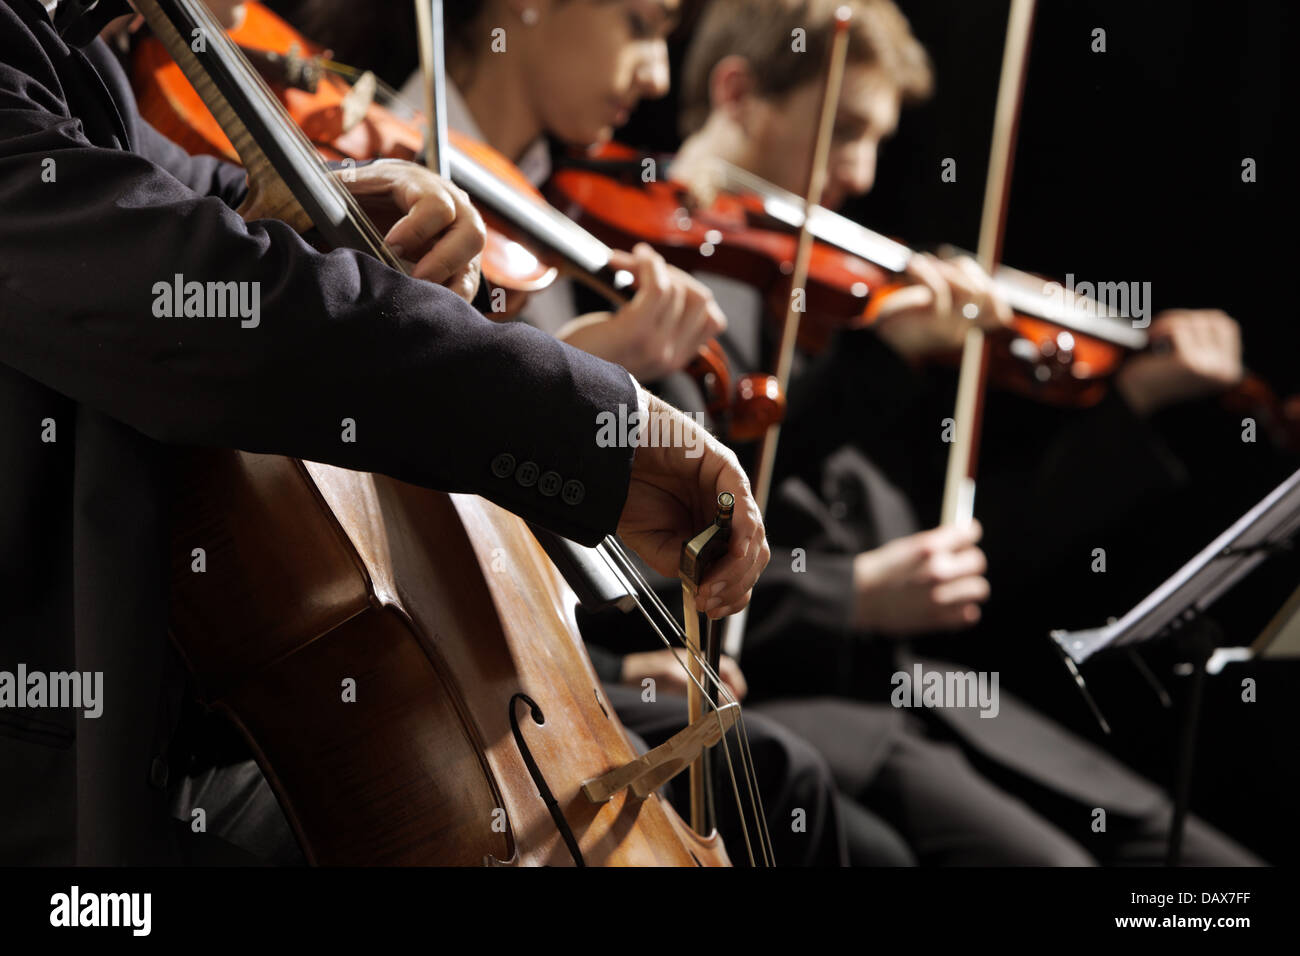 Classical music concert Stock Photo